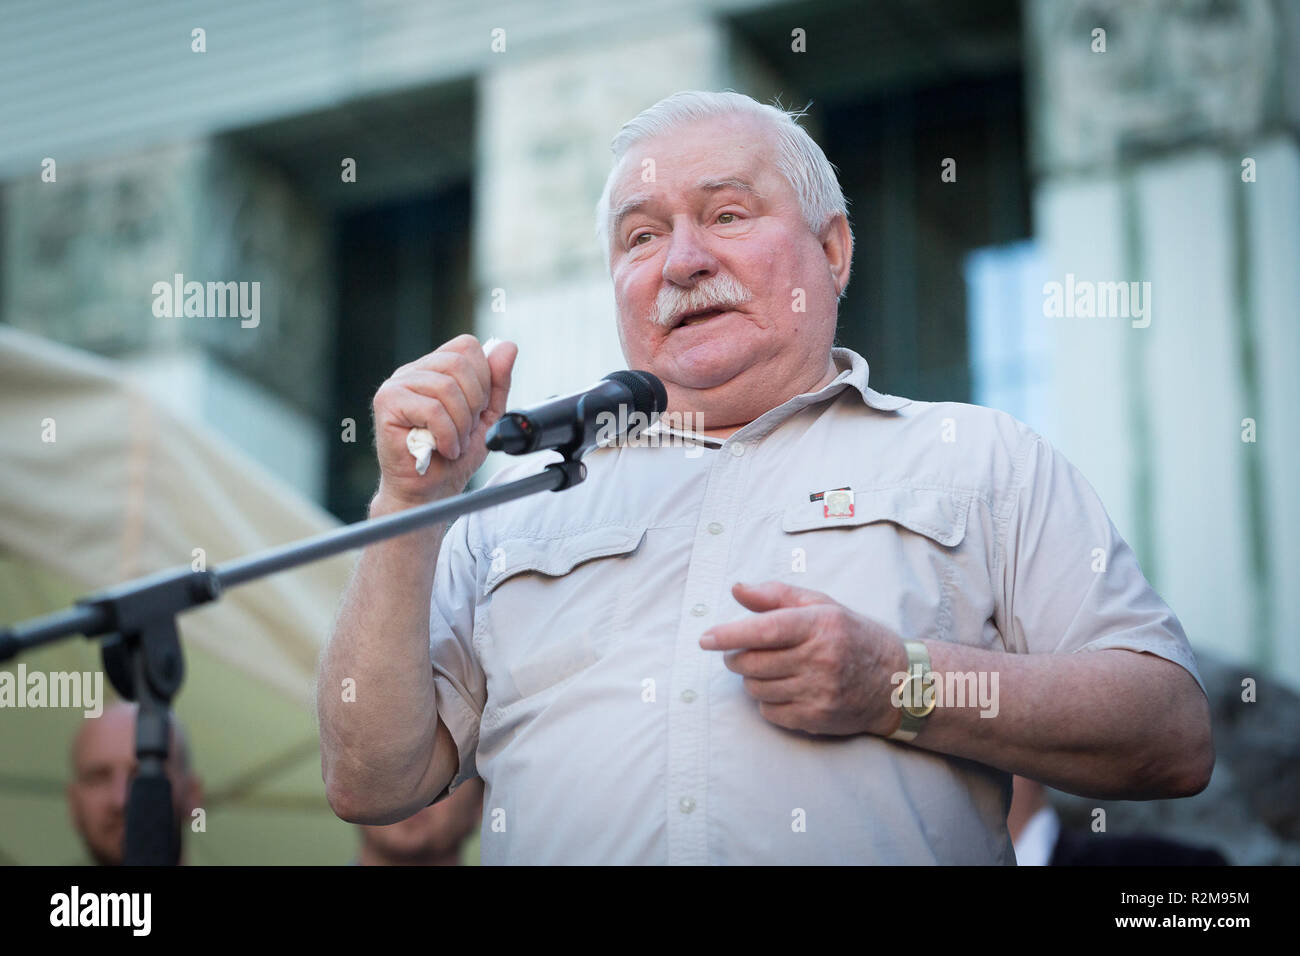 Polish former president and Nobel Peace Prize winner Lech Walesa addresses a crowd of right-wing government opponents during the protest in front of the Sad Najwyzszy, (the Polish Supreme Court) in Warsaw, Poland on 4 July 2018 Stock Photo